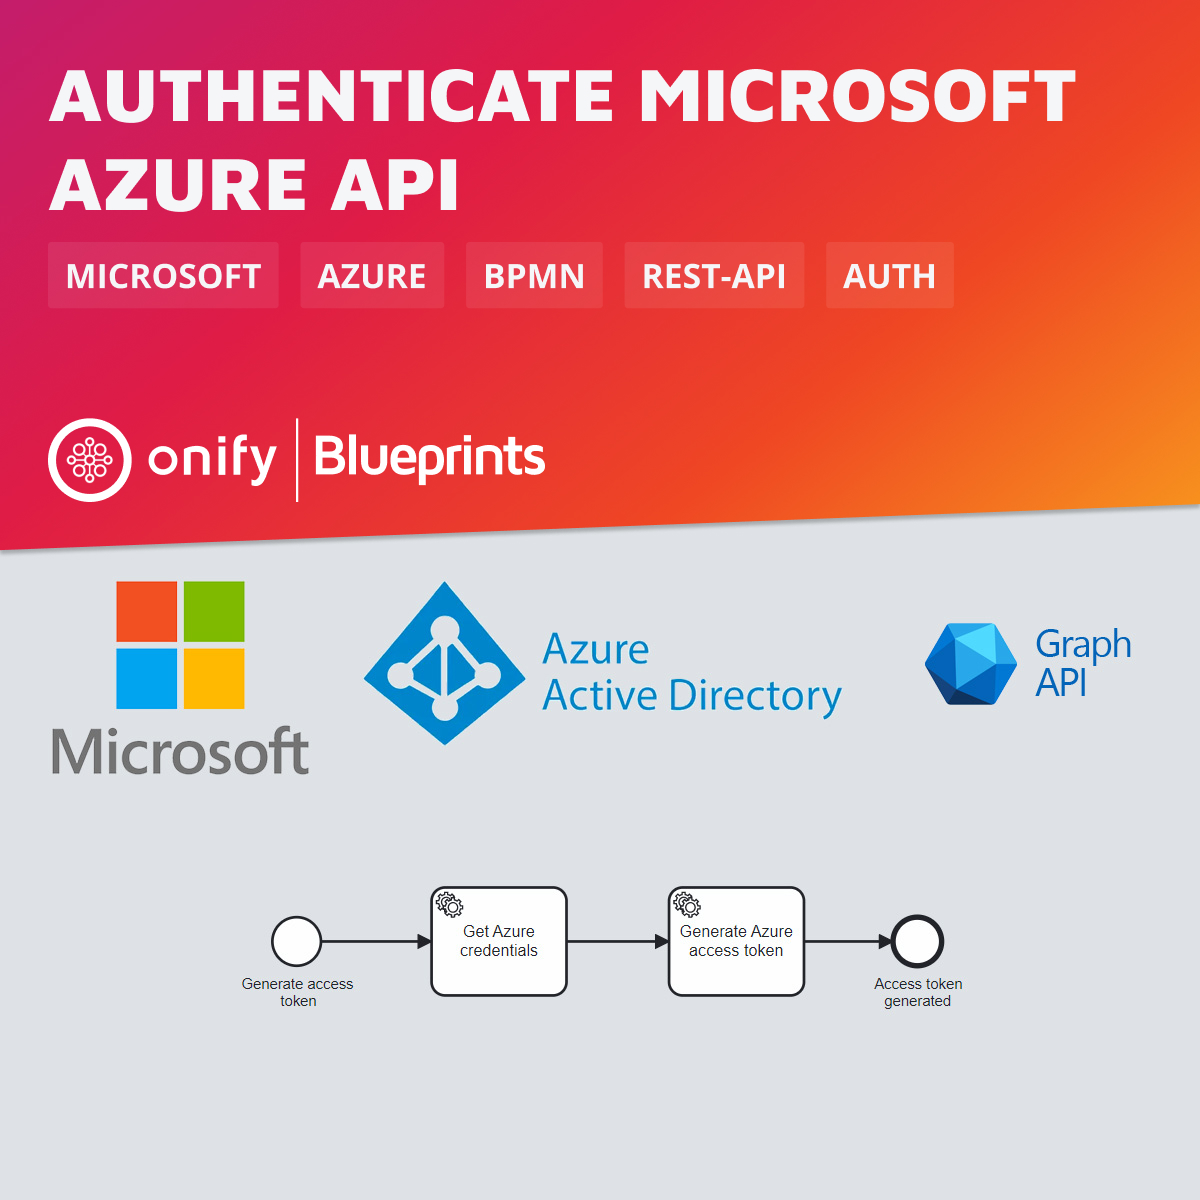 Onify Blueprint – Authenticate against Microsoft Azure (AD) API using OAuth 2.0